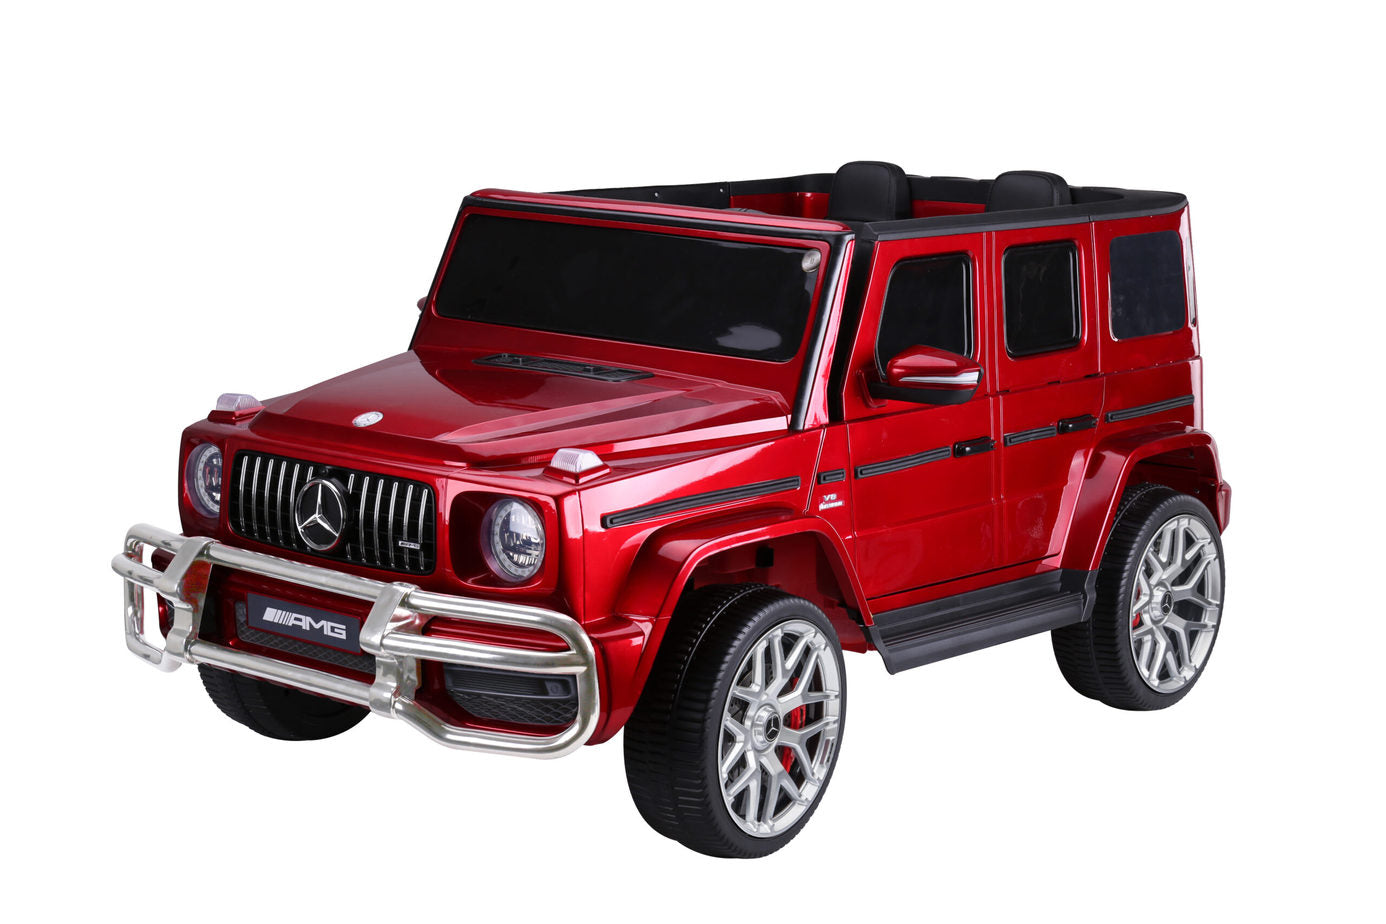 "Red Mercedes G-Wagon AMG G63, 2 Seater Jeep with 4-wheel drive, electric ride on for kids on white background."